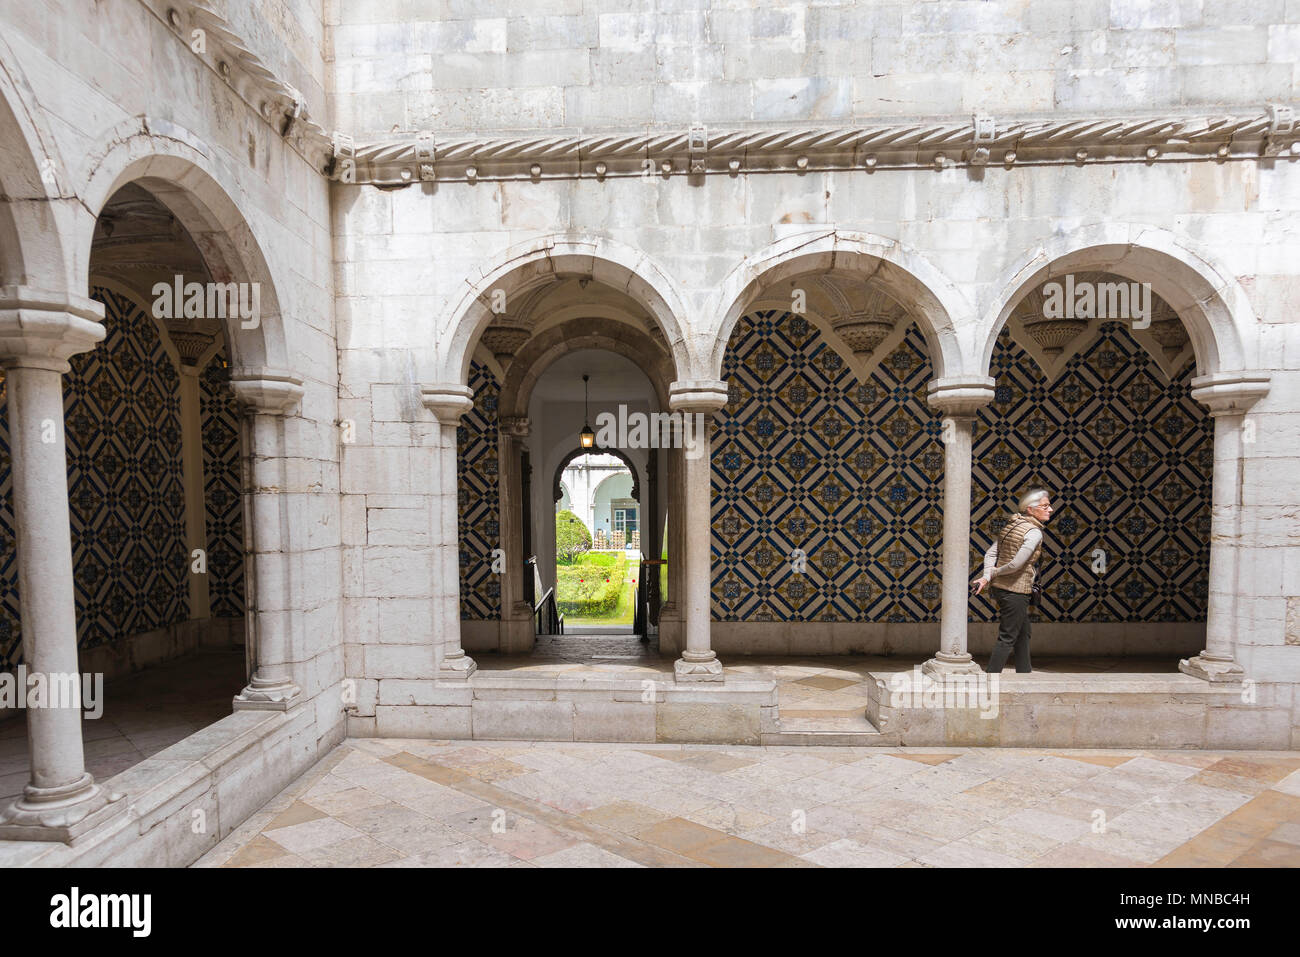 Portugal tile museum, view of a tourist walking in a cloister in the central courtyard of the Museu Nacional do Azulejo in Lisbon, Portugal. Stock Photo